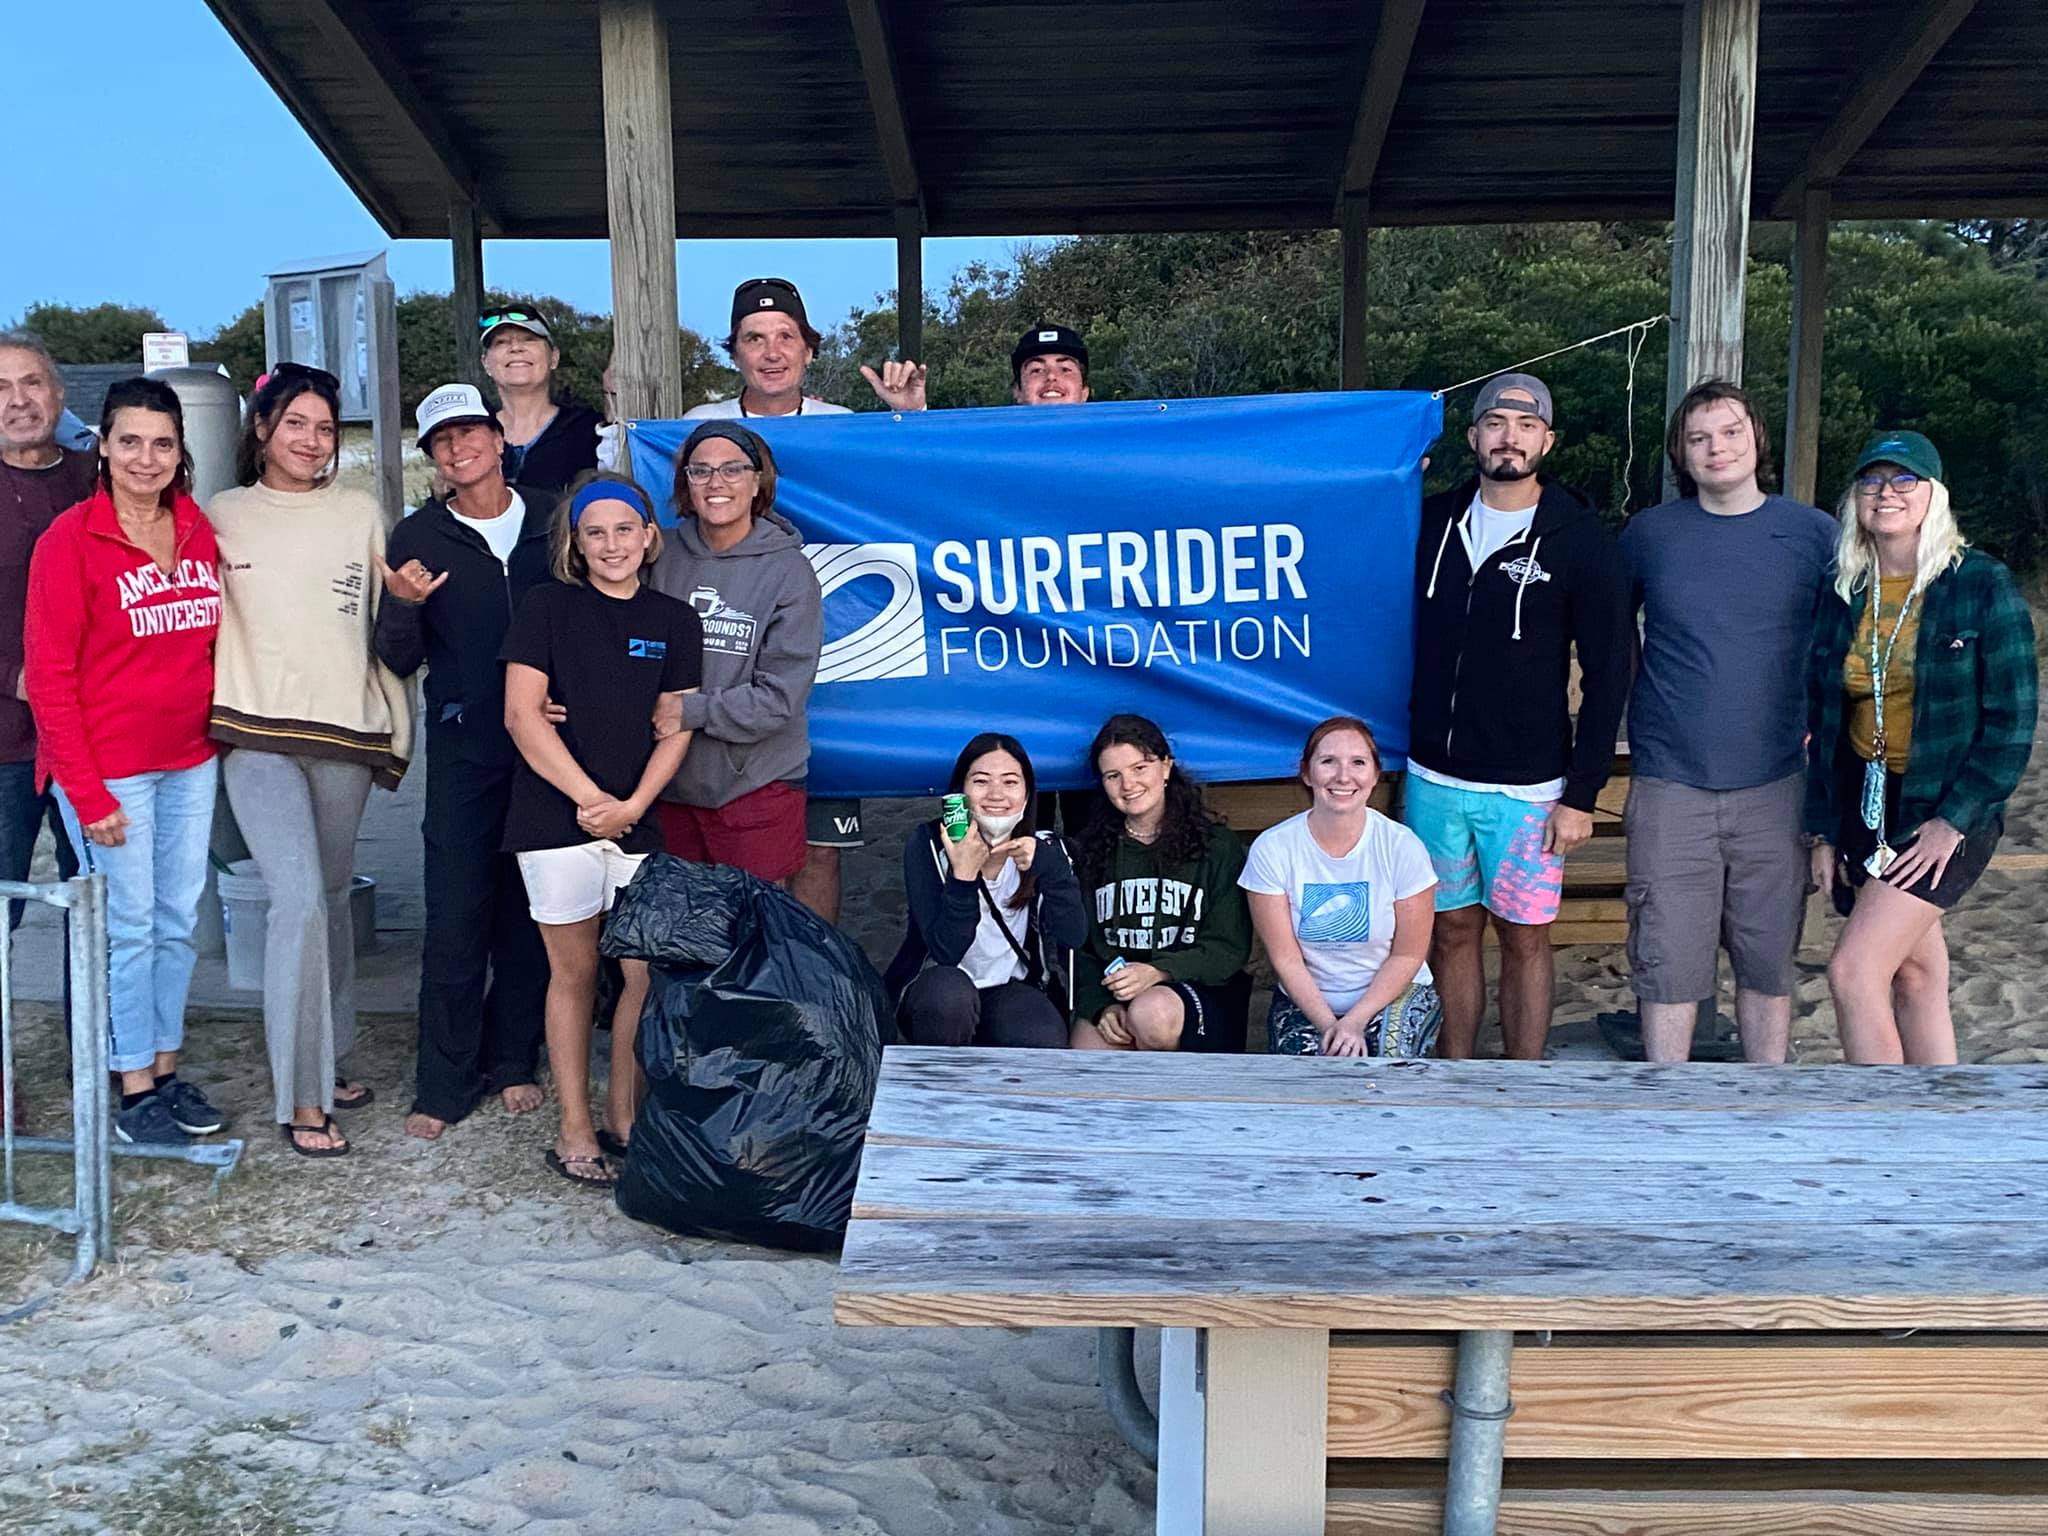 Group photo of Surfrider members after a beach cleanup at Assateague